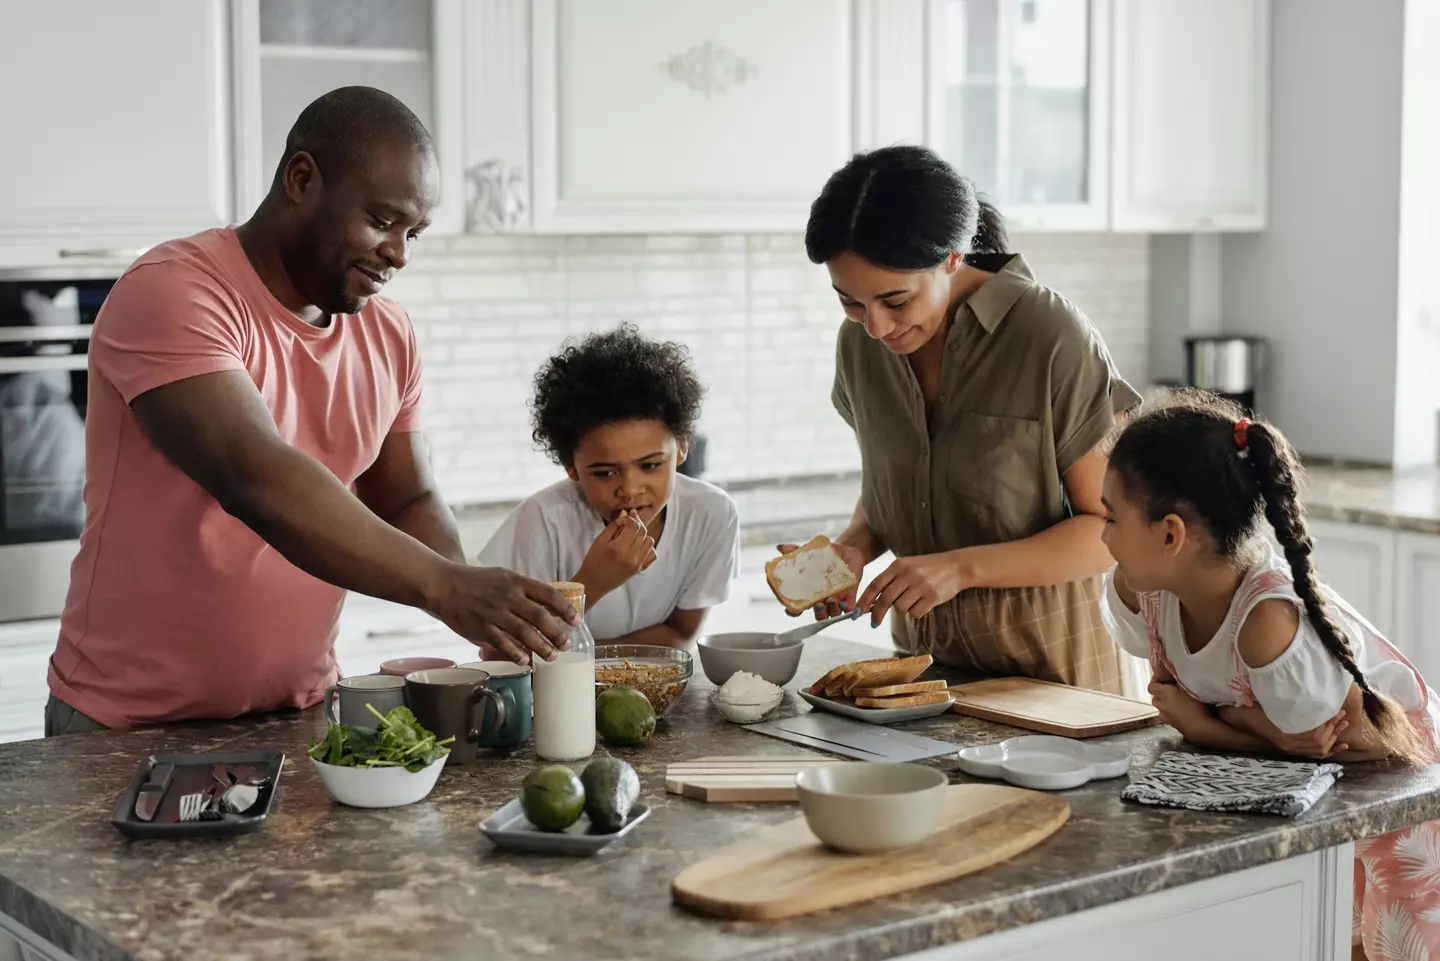 The dad now has to make dinner for the entire family (stock image).